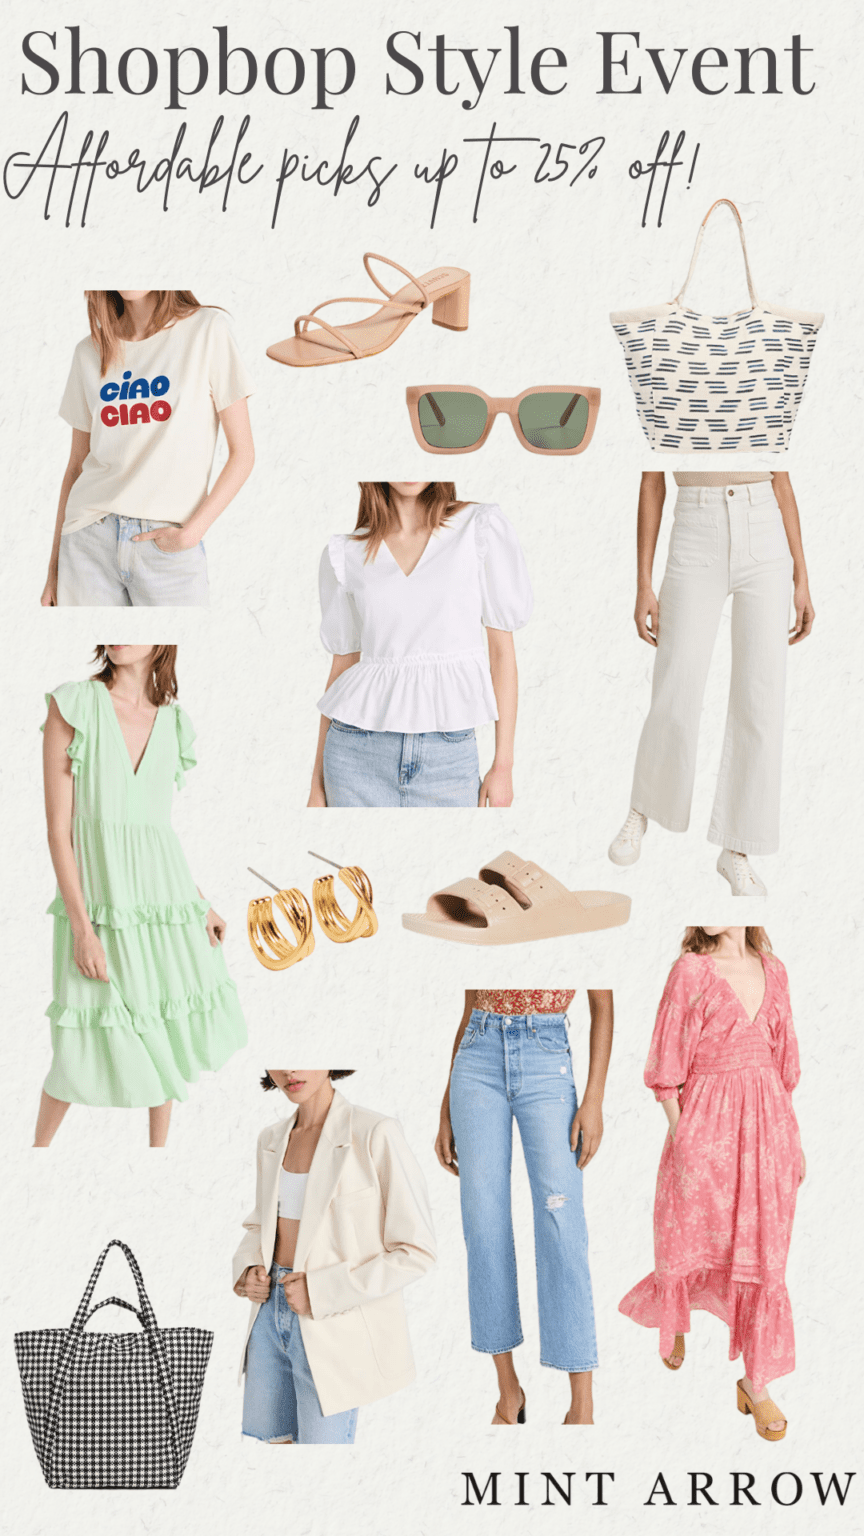 How to save BIG on what you really want from Shopbop (pssst promo code ...